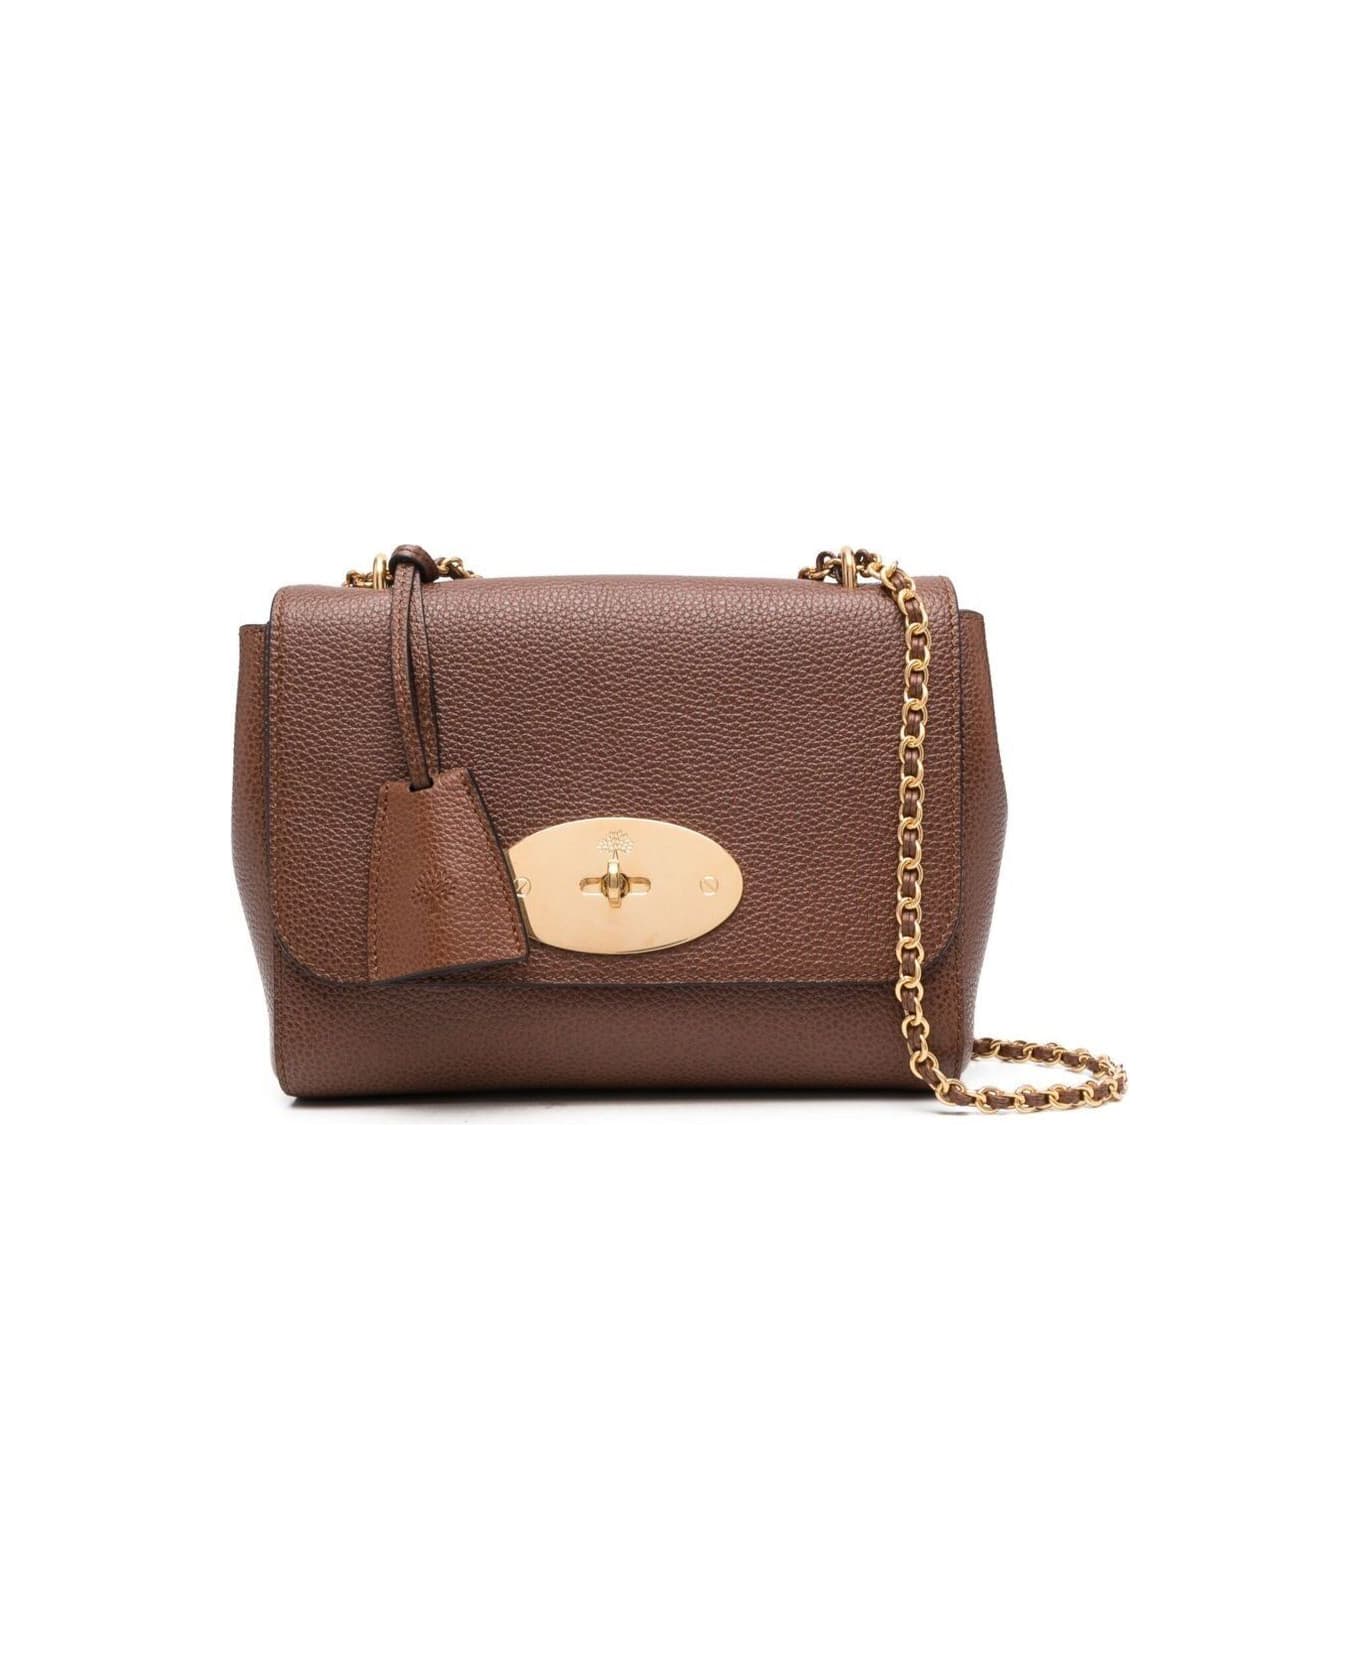 Mulberry Lily Crossbody Bag In Brown Leather Woman - Brown